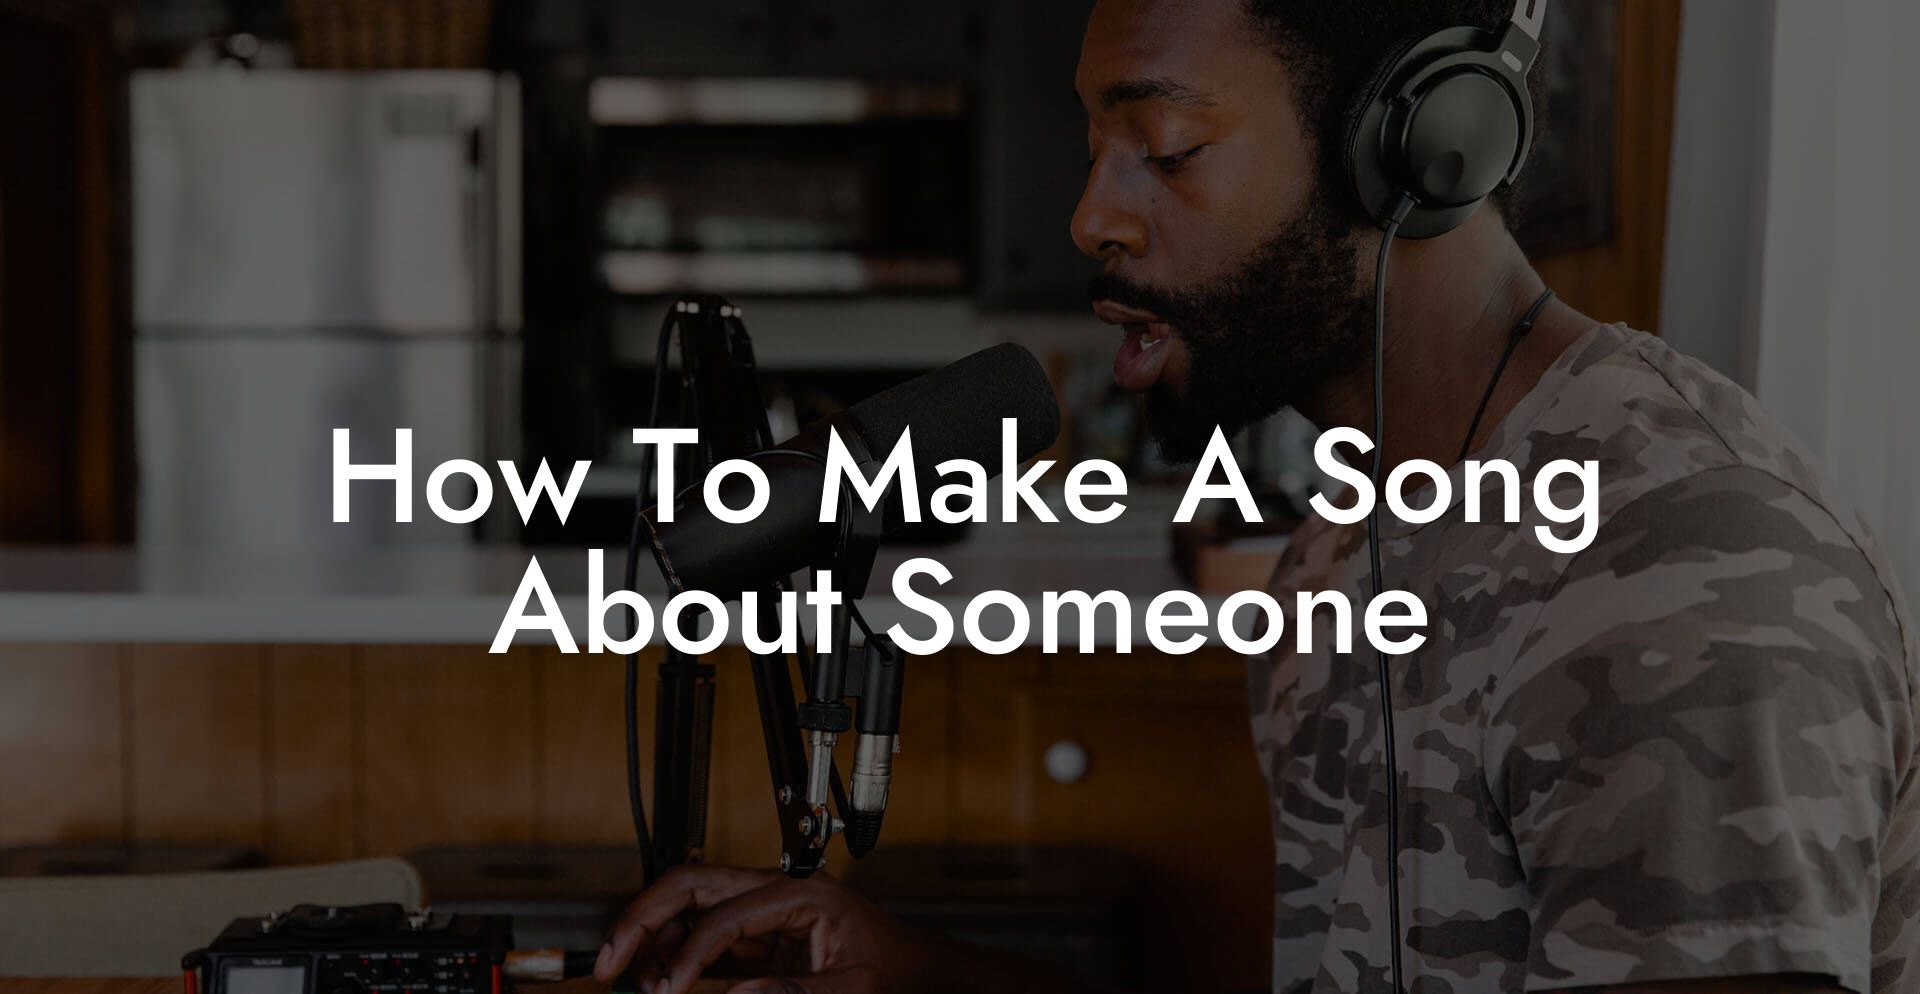 how to make a song about someone lyric assistant